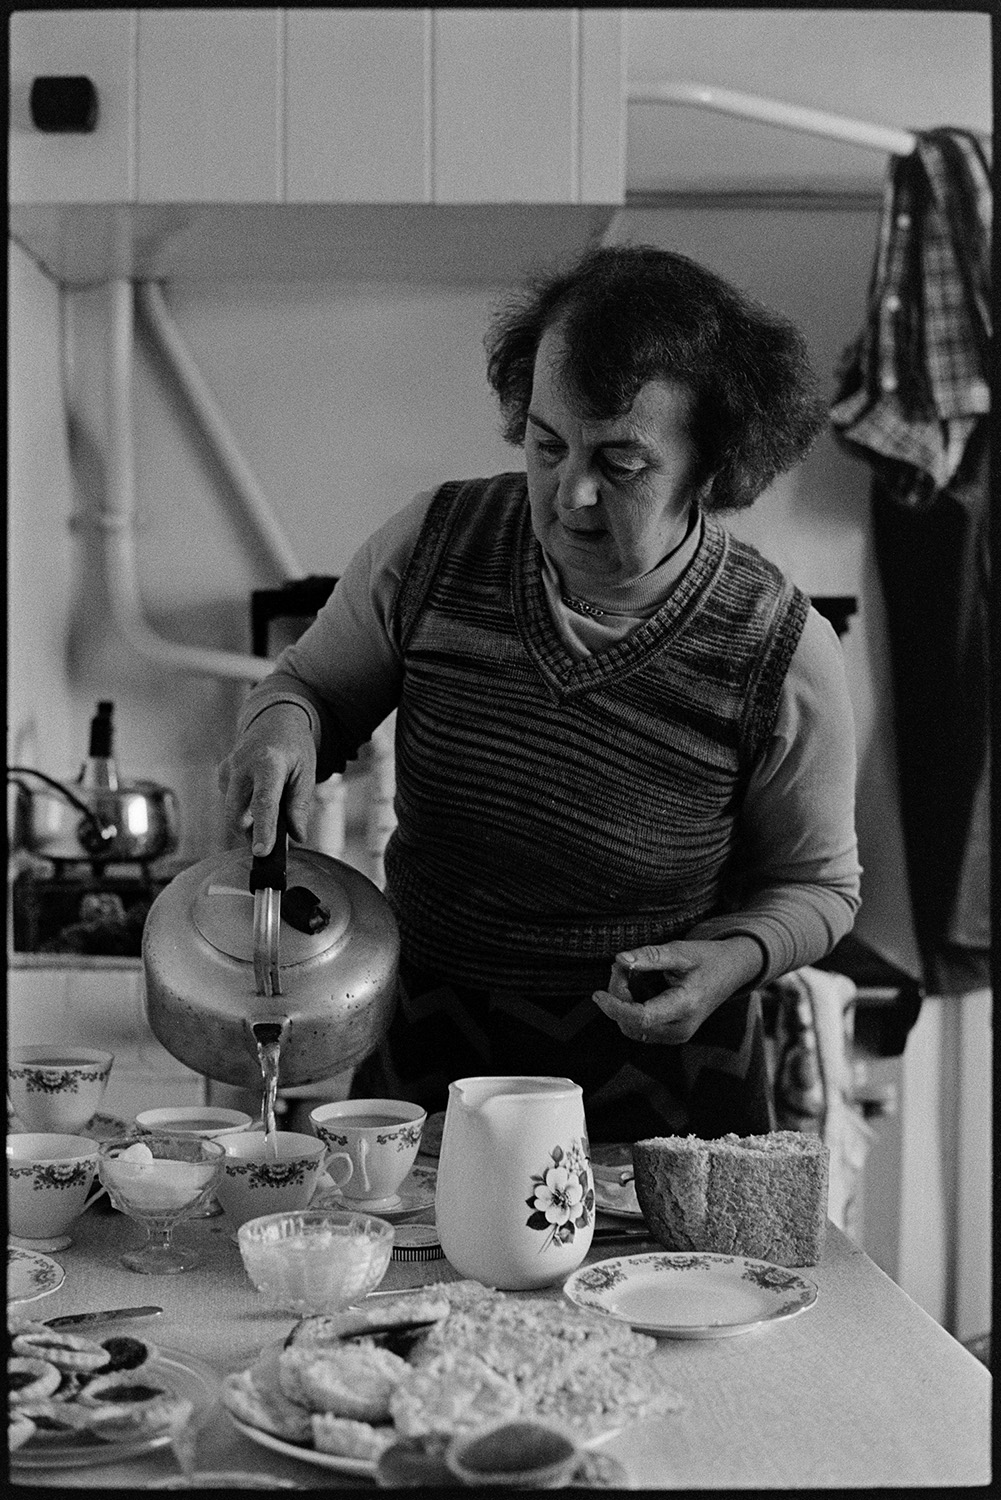 Woman, farmers wife cooking and making tea. 
[Hettie Ward making cups of tea in her kitchen at Parsonage, Iddesleigh. She is pouring hot water in to the teacups from a kettle. The kitchen table is laid for tea with cakes and slices of bread.]